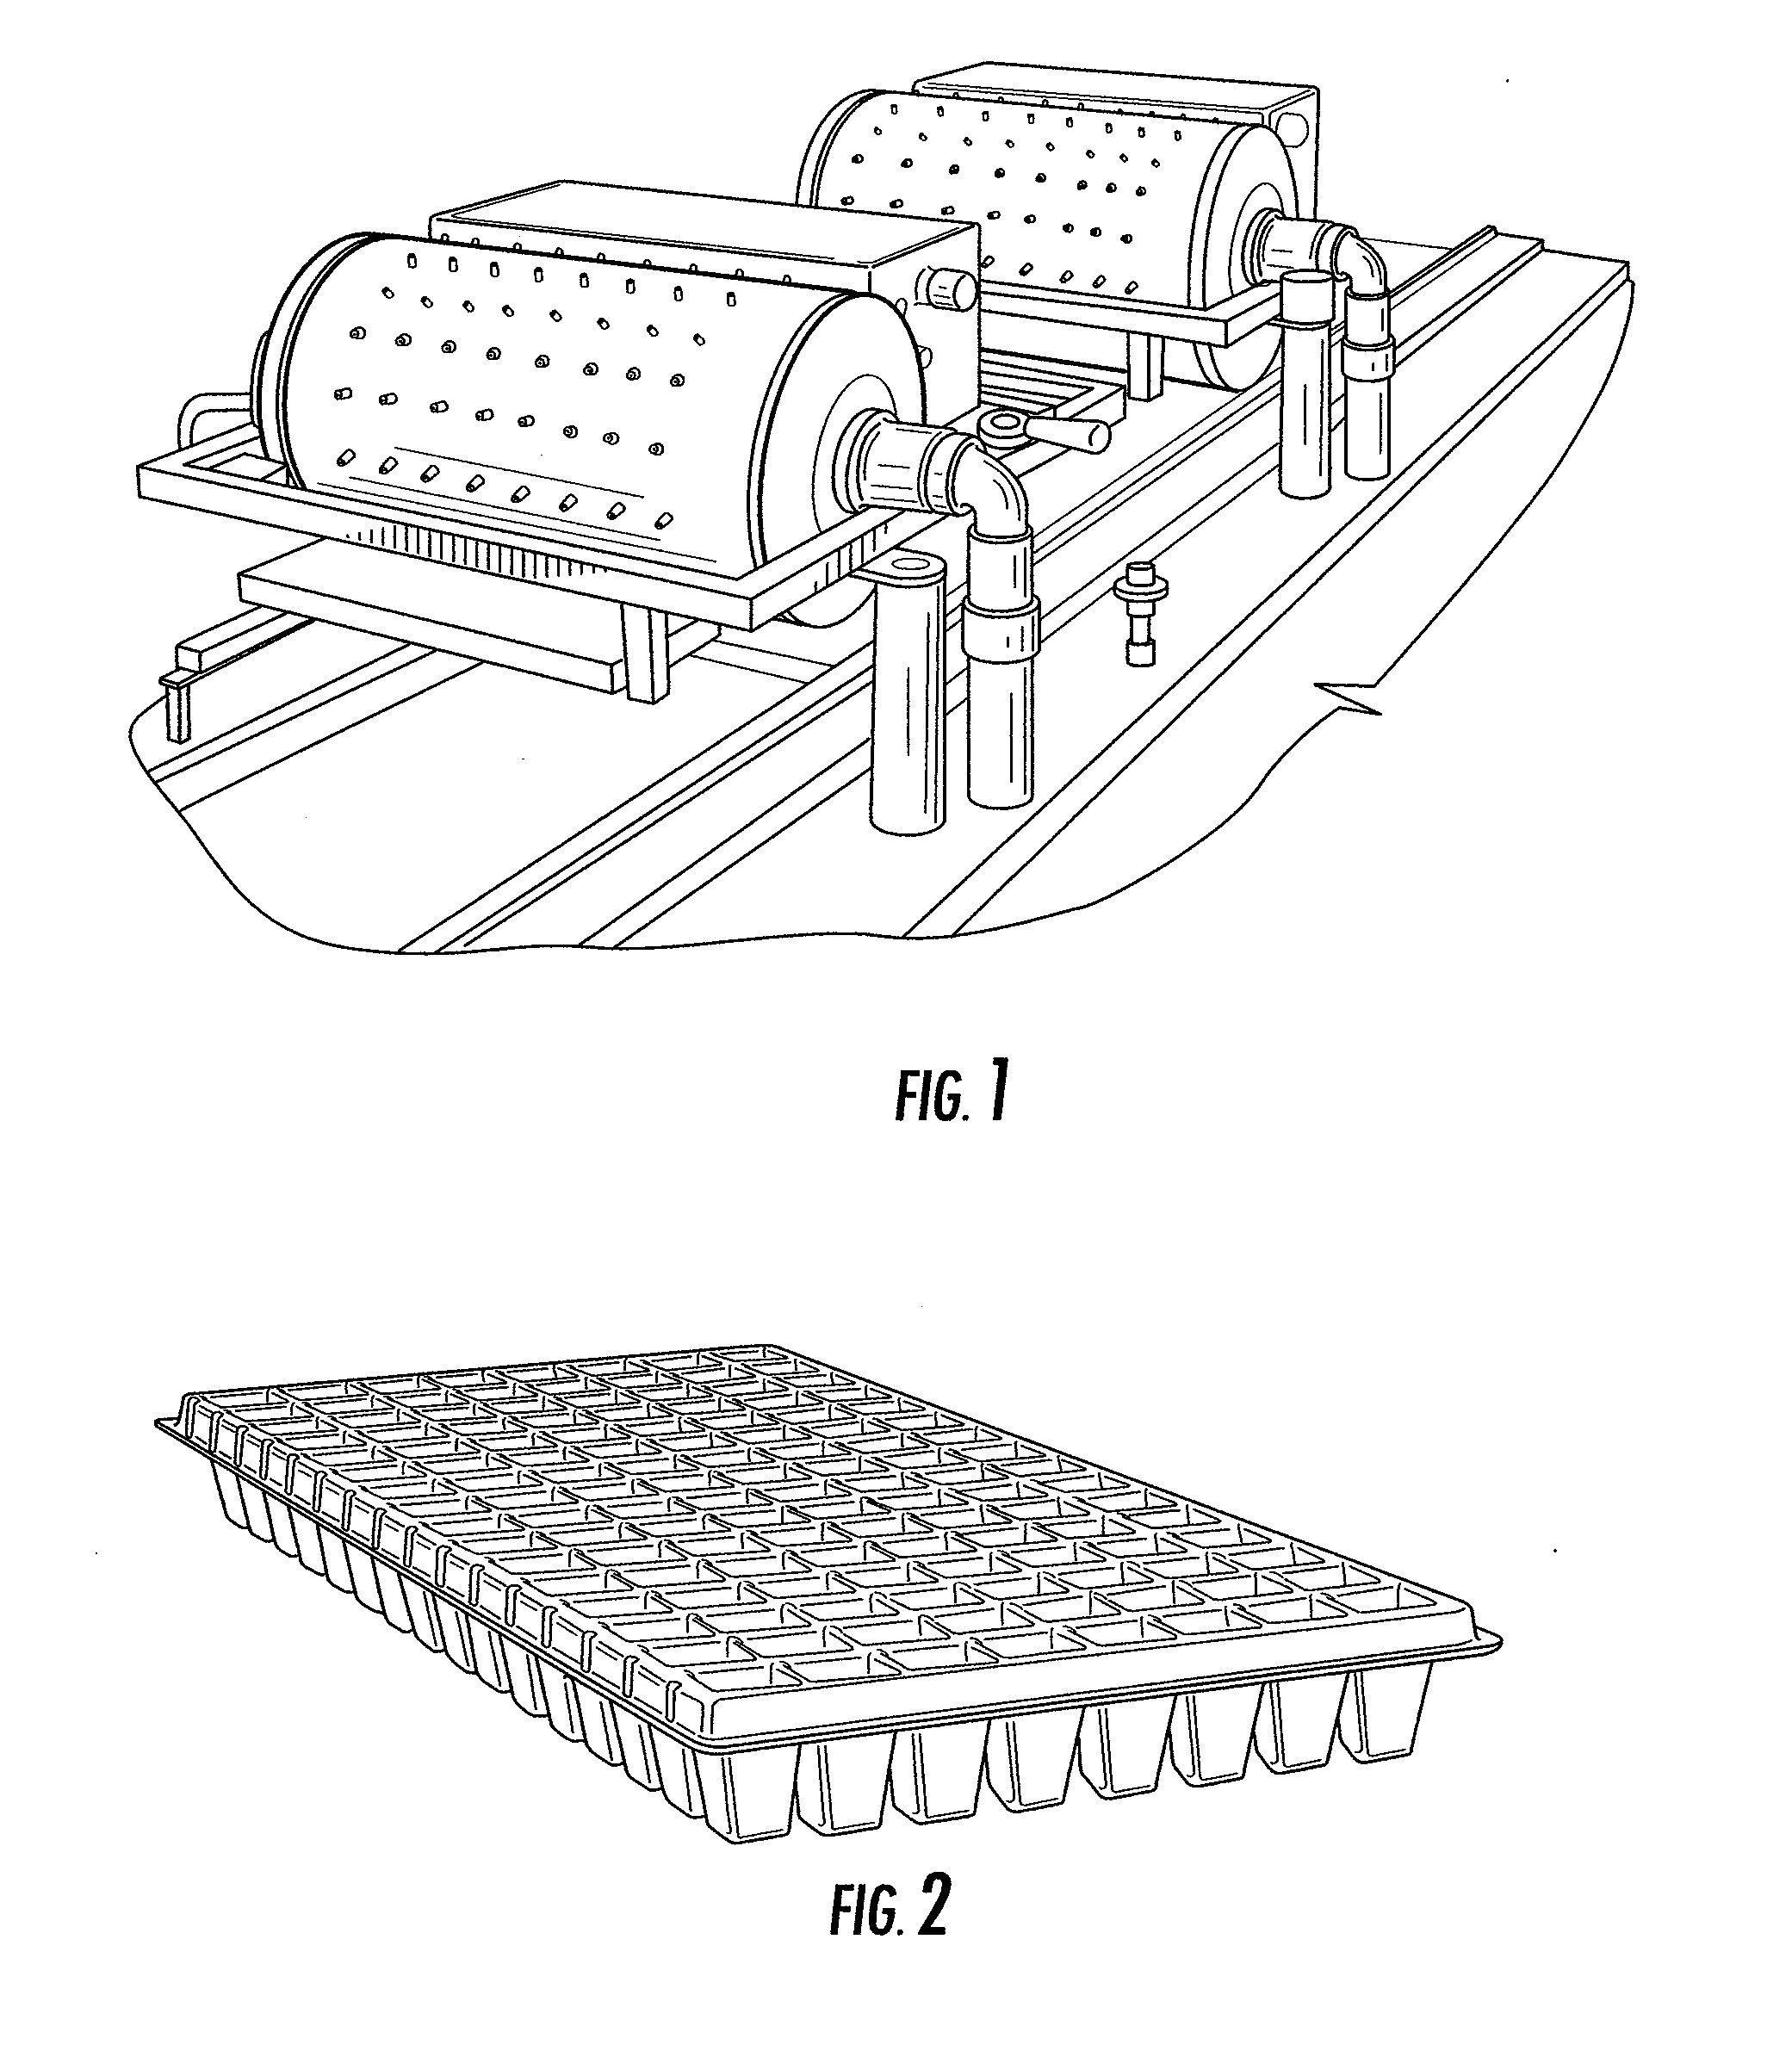 Method of planting triploid seedless watermelon seeds and enhanced watermelon pollenizer seeds for producing watermelon transplants